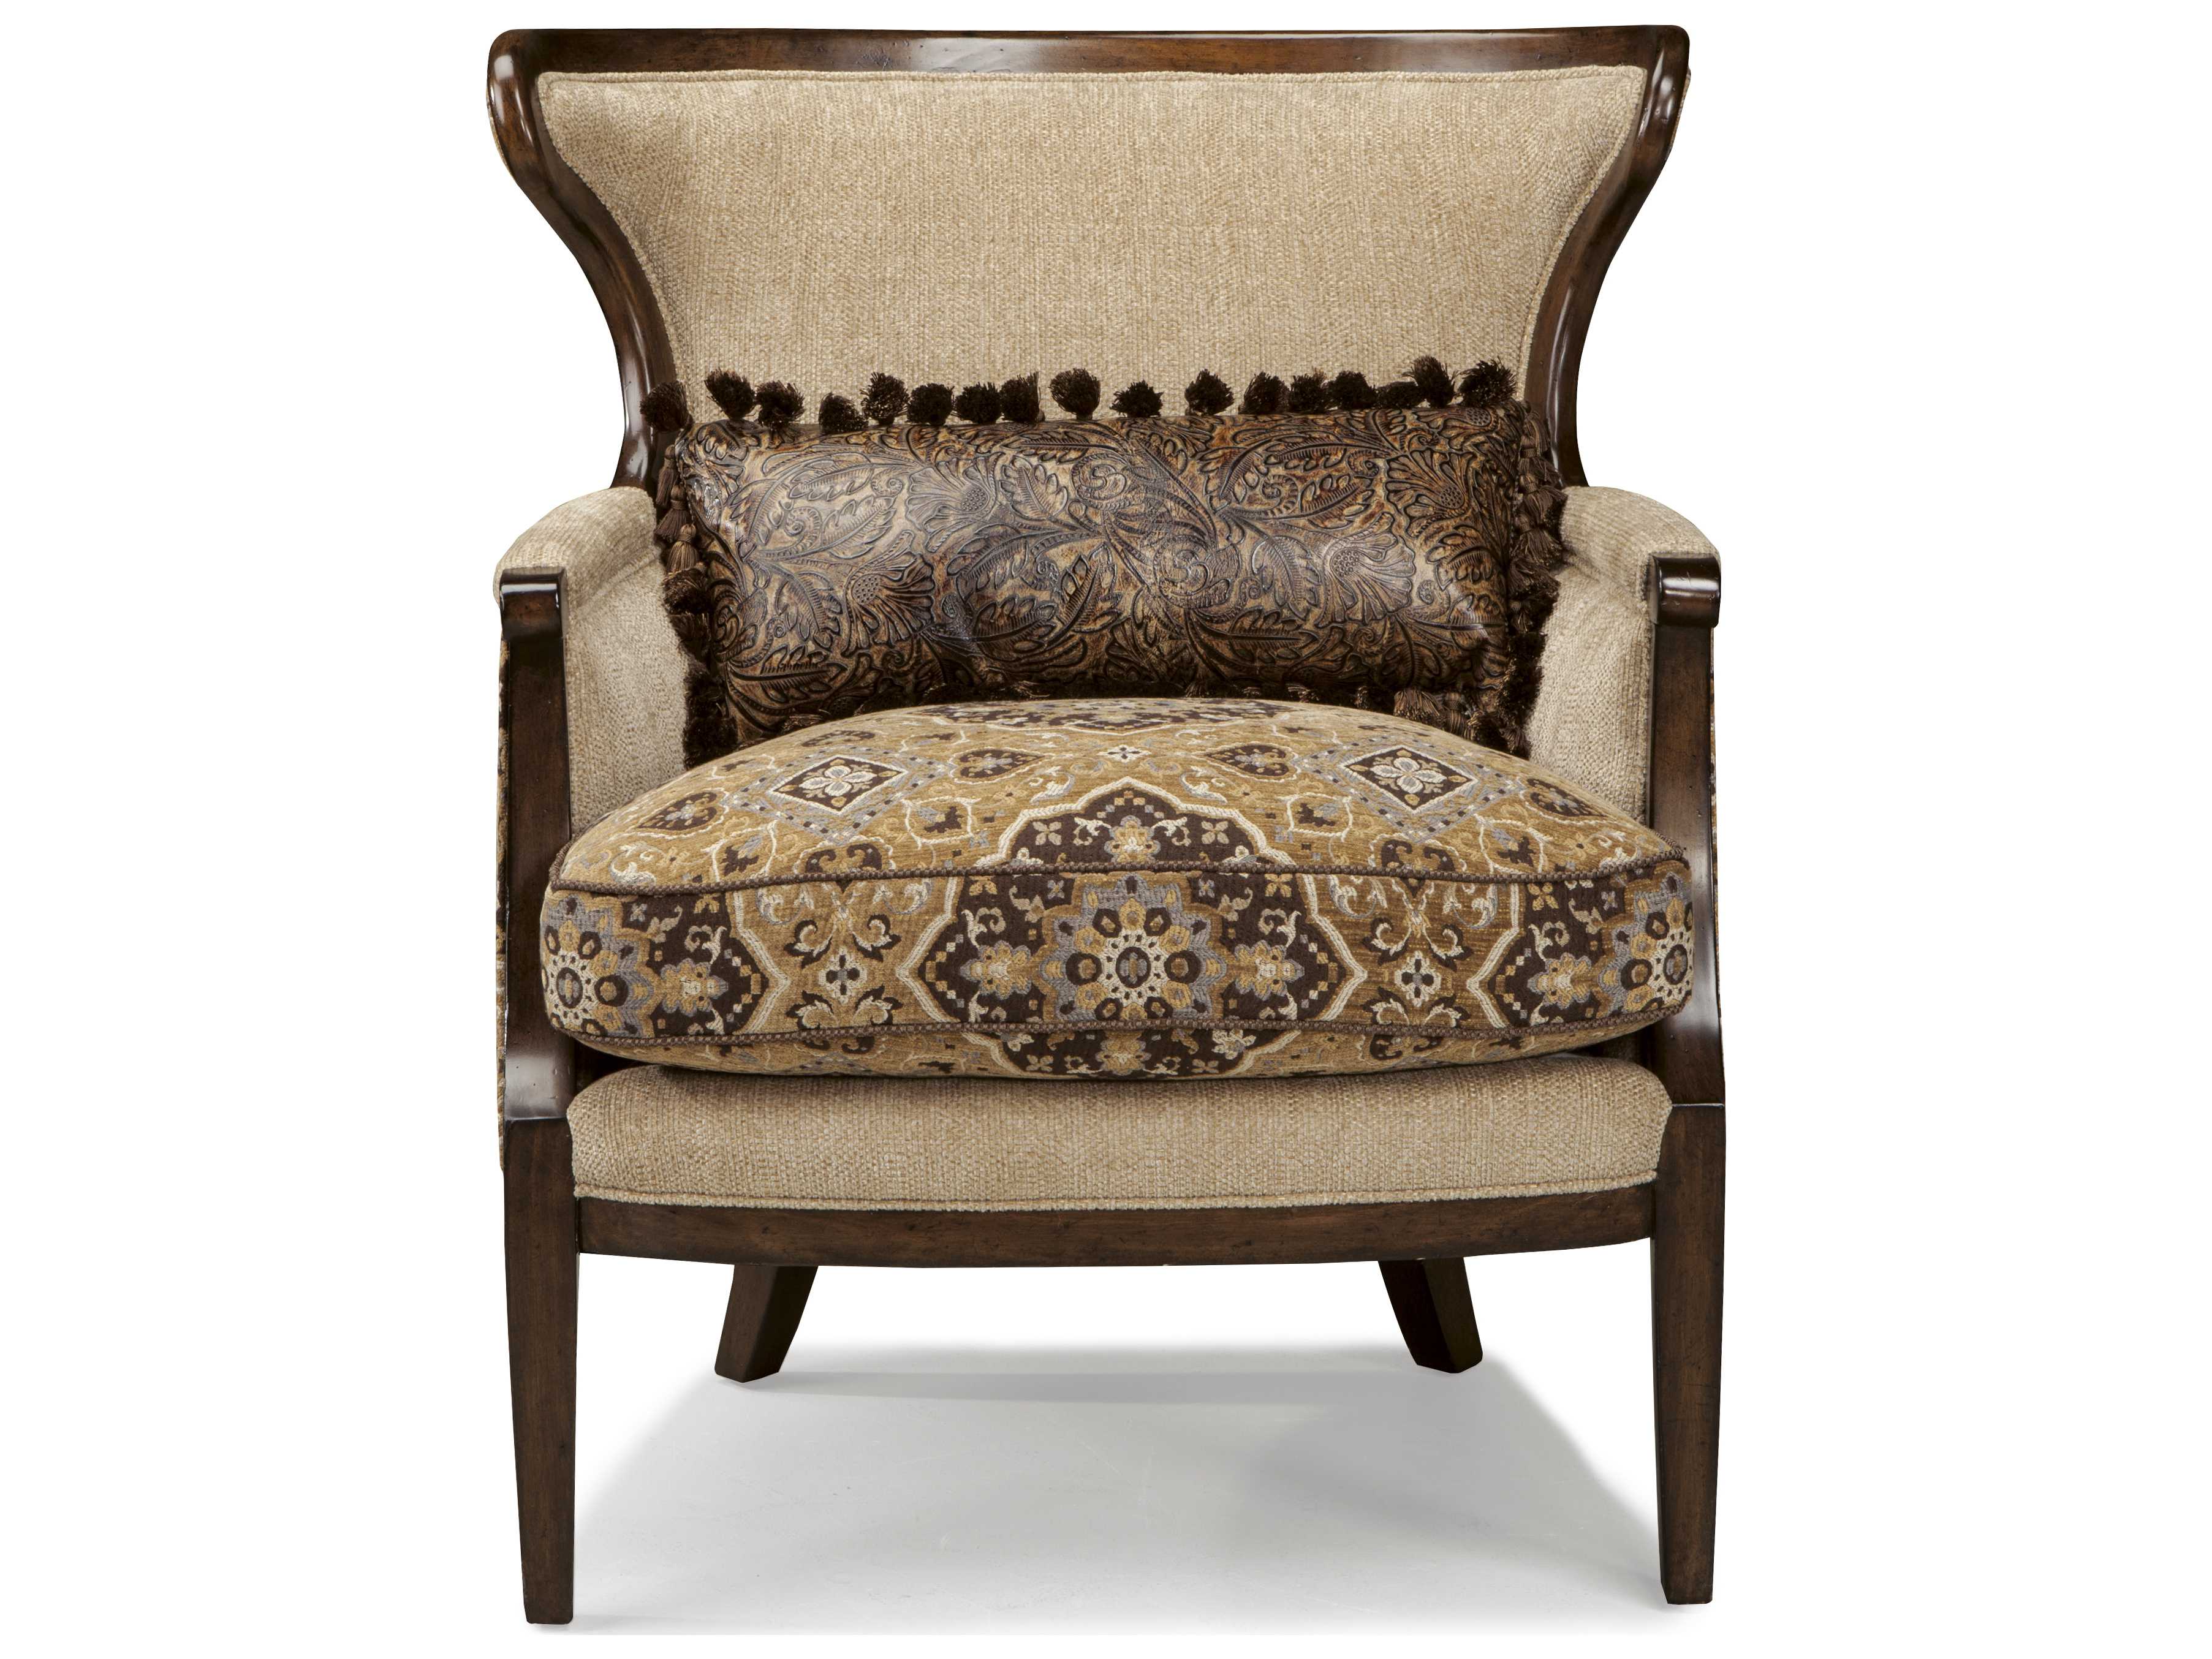 Rustic Accent Chairs : Rustic Chic Cottage Style Wingback Accent Chair